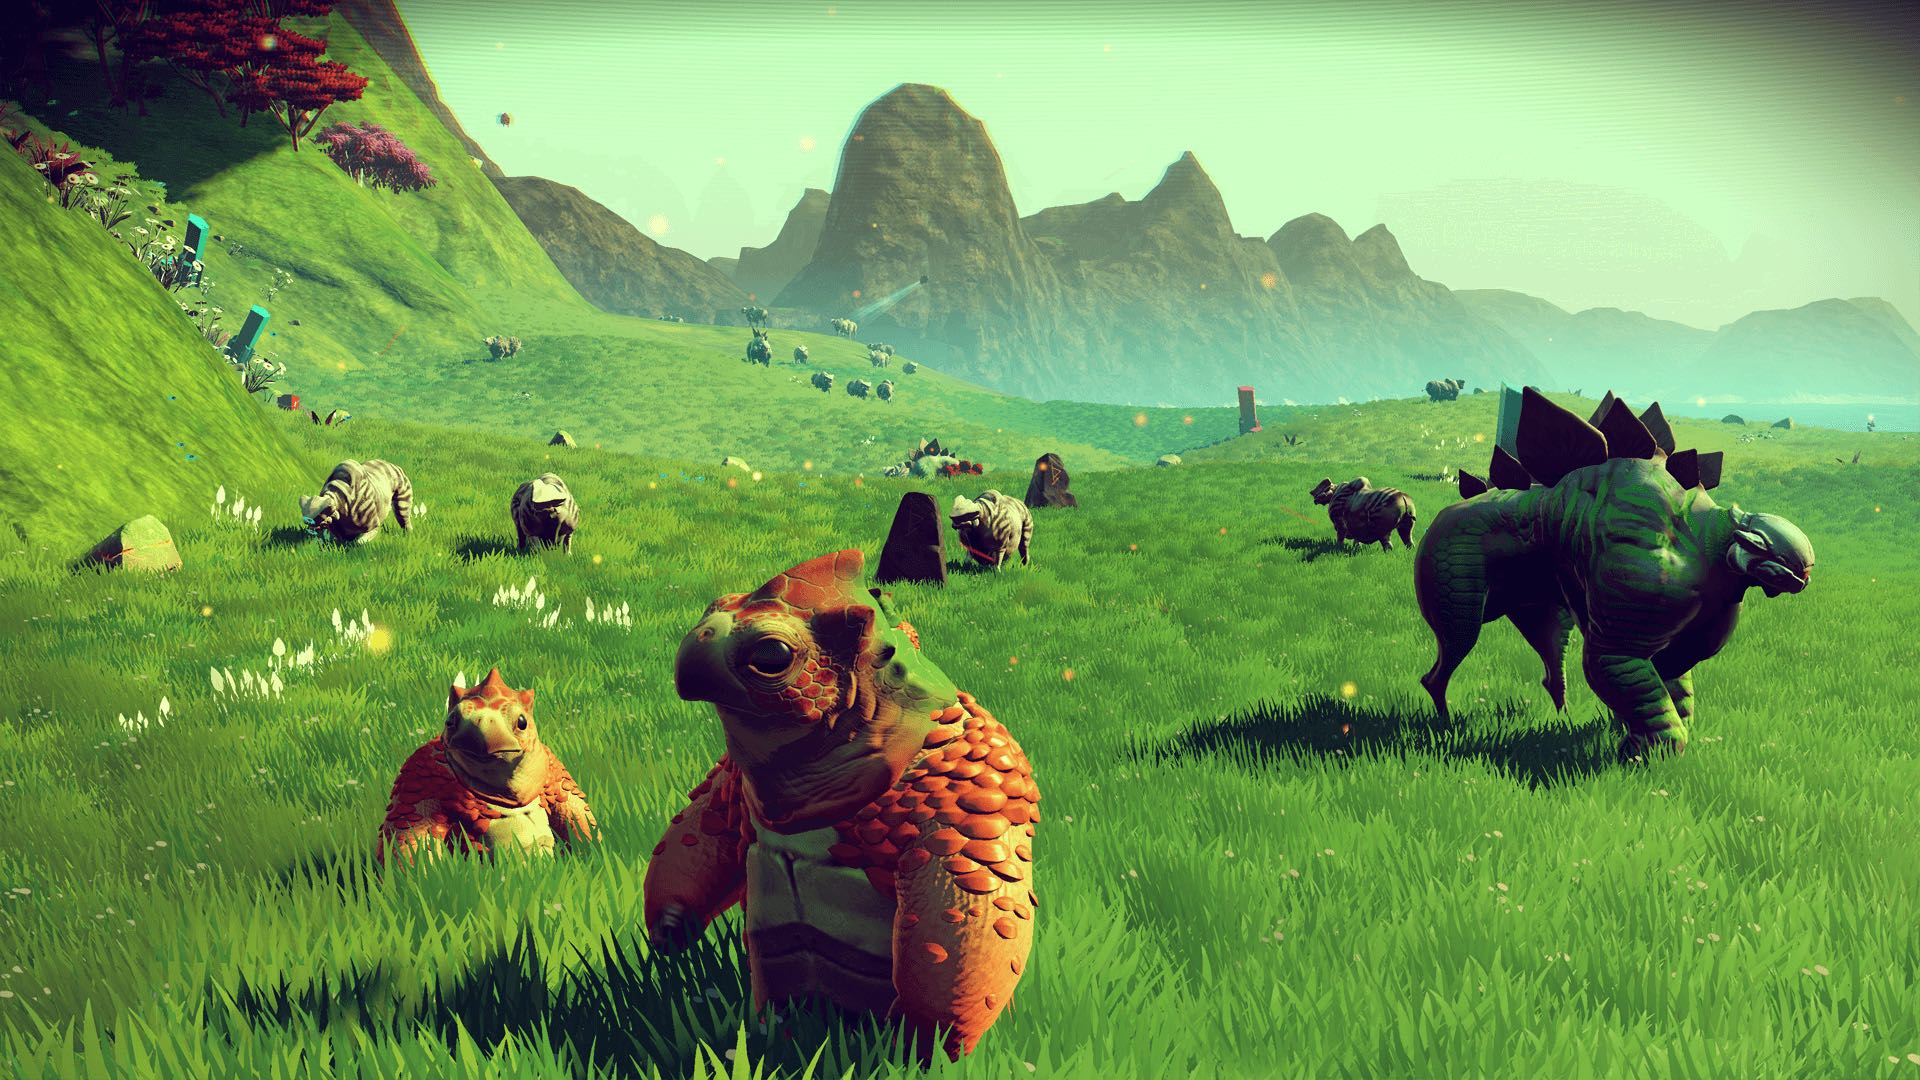 Grass in No Man's Sky